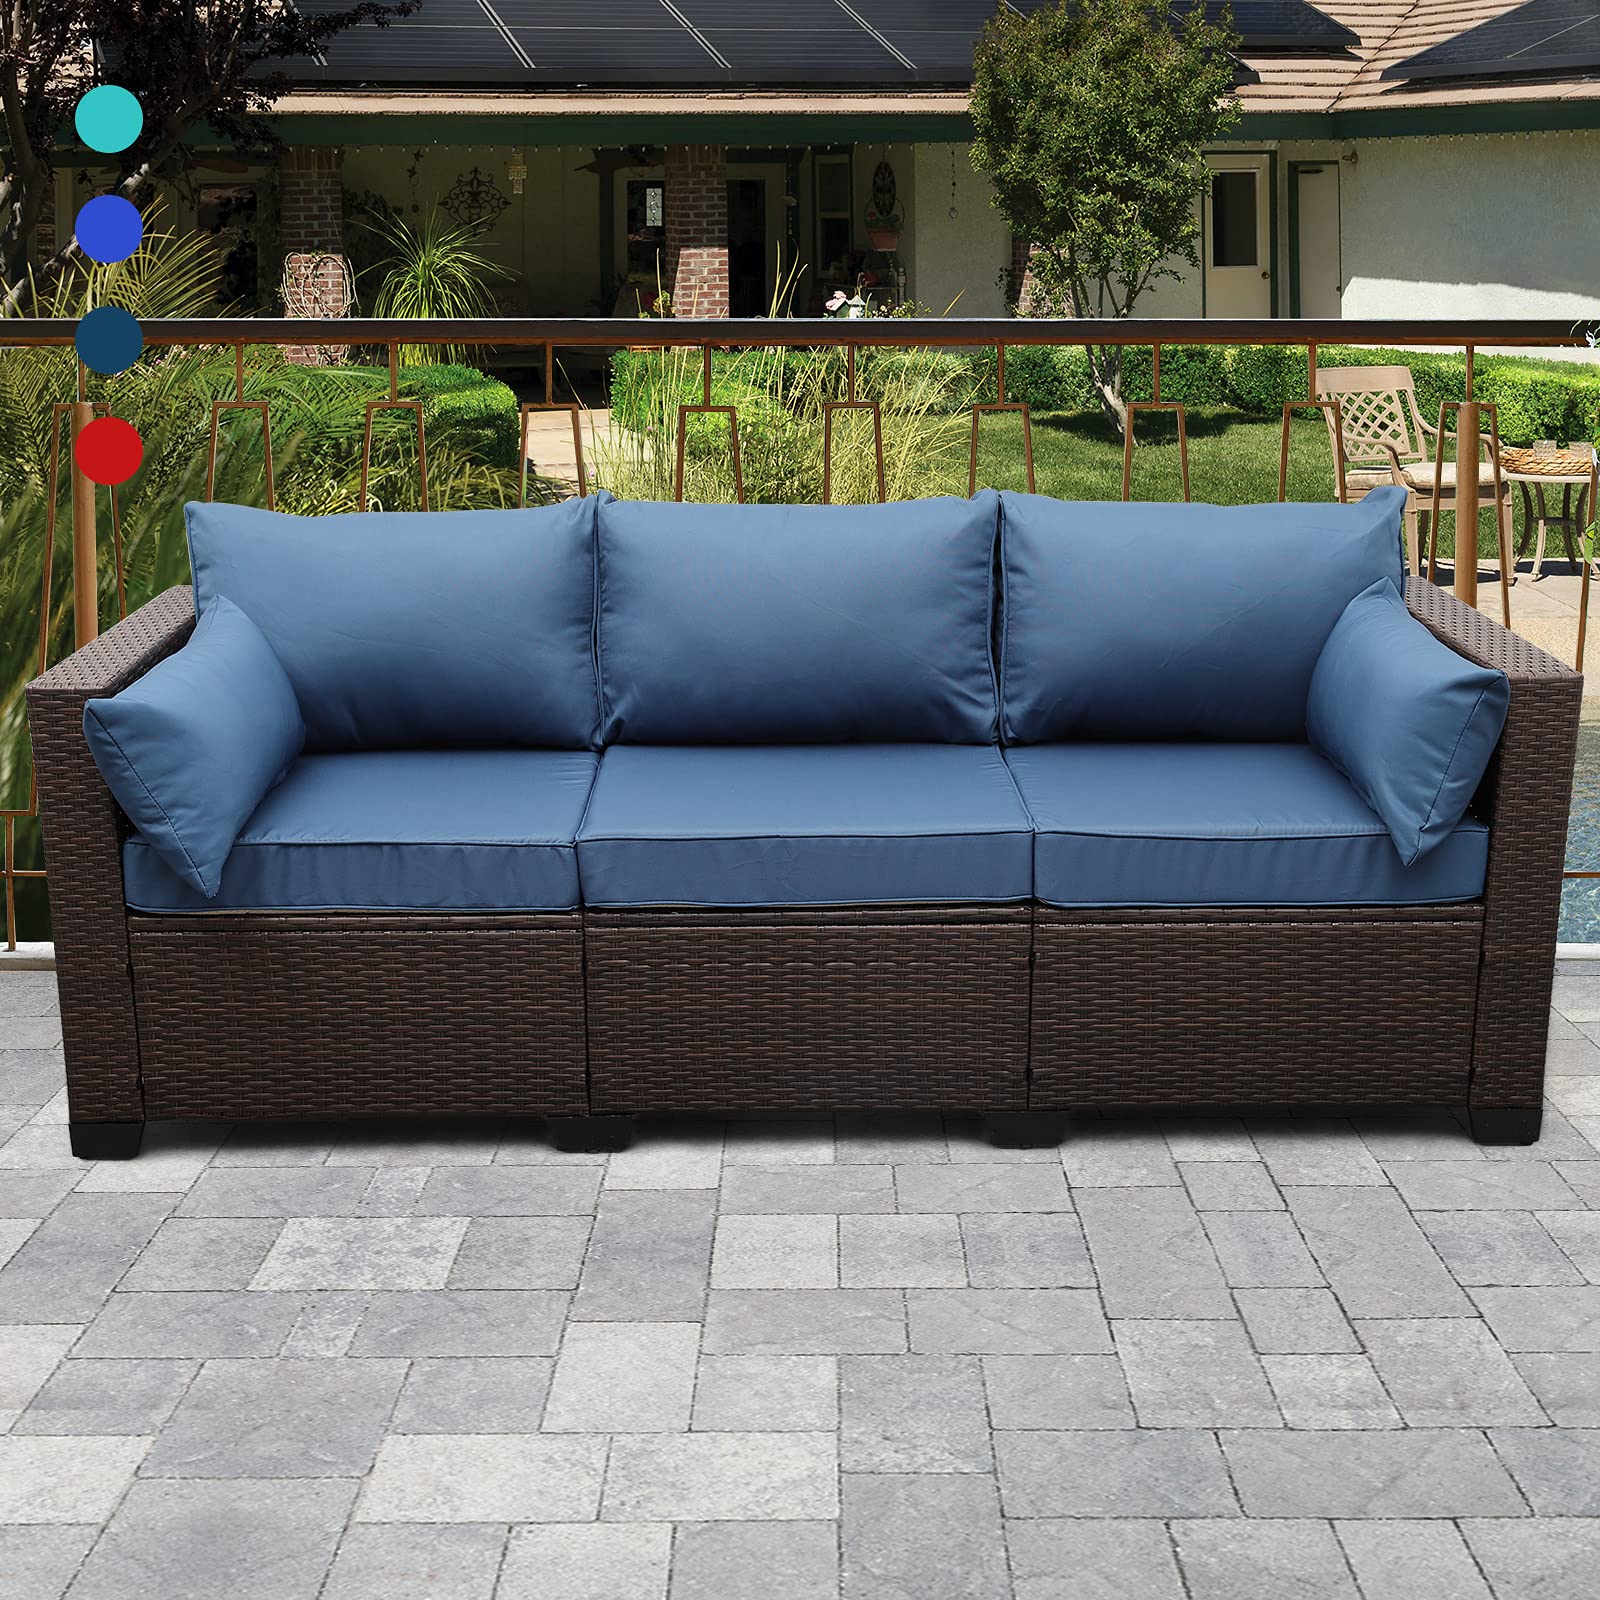 Rattaner 3-Seat Patio Wicker Sofa, Outdoor Rattan Couch Furniture Steel Frame With Furniture Cover And Deep Seat High Back, Blue